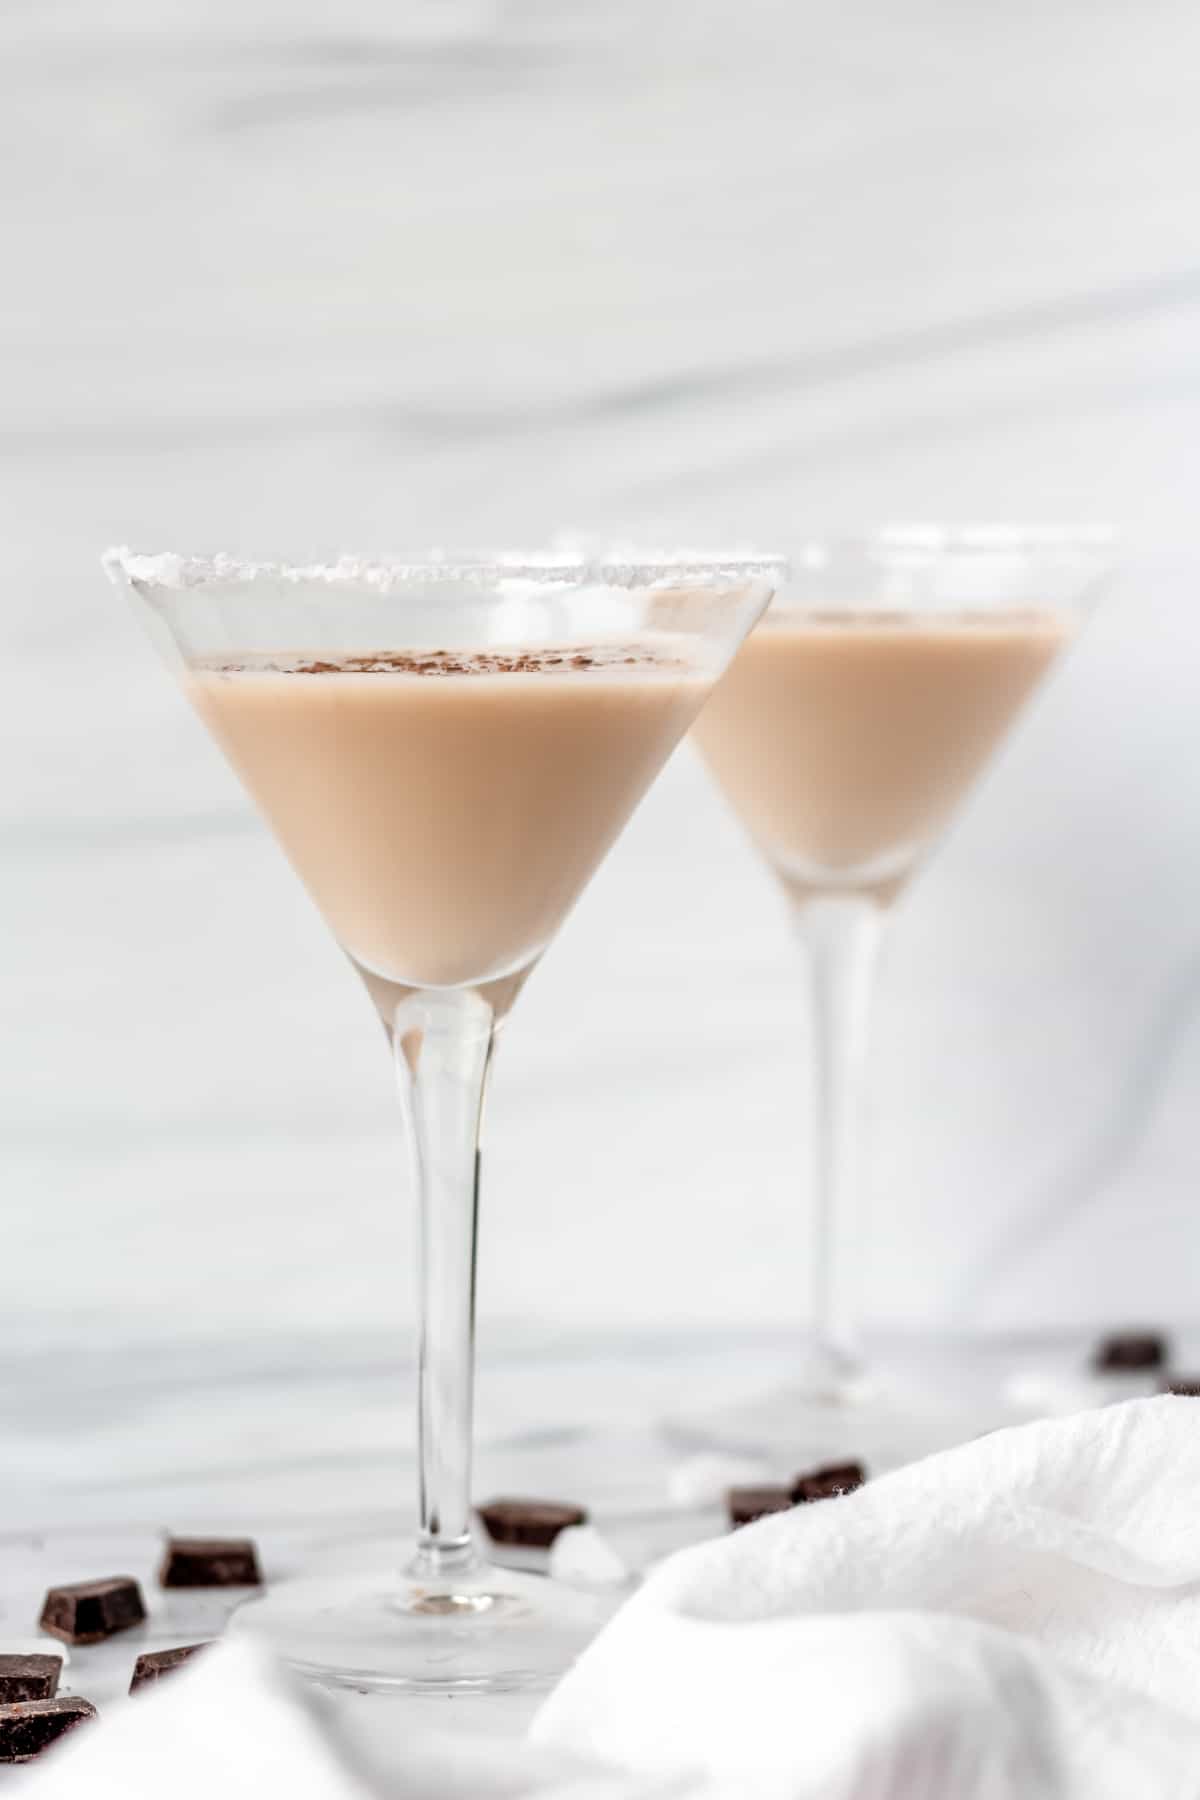 2 chocolate mint martinis from the side with a white towel and chocolate pieces.